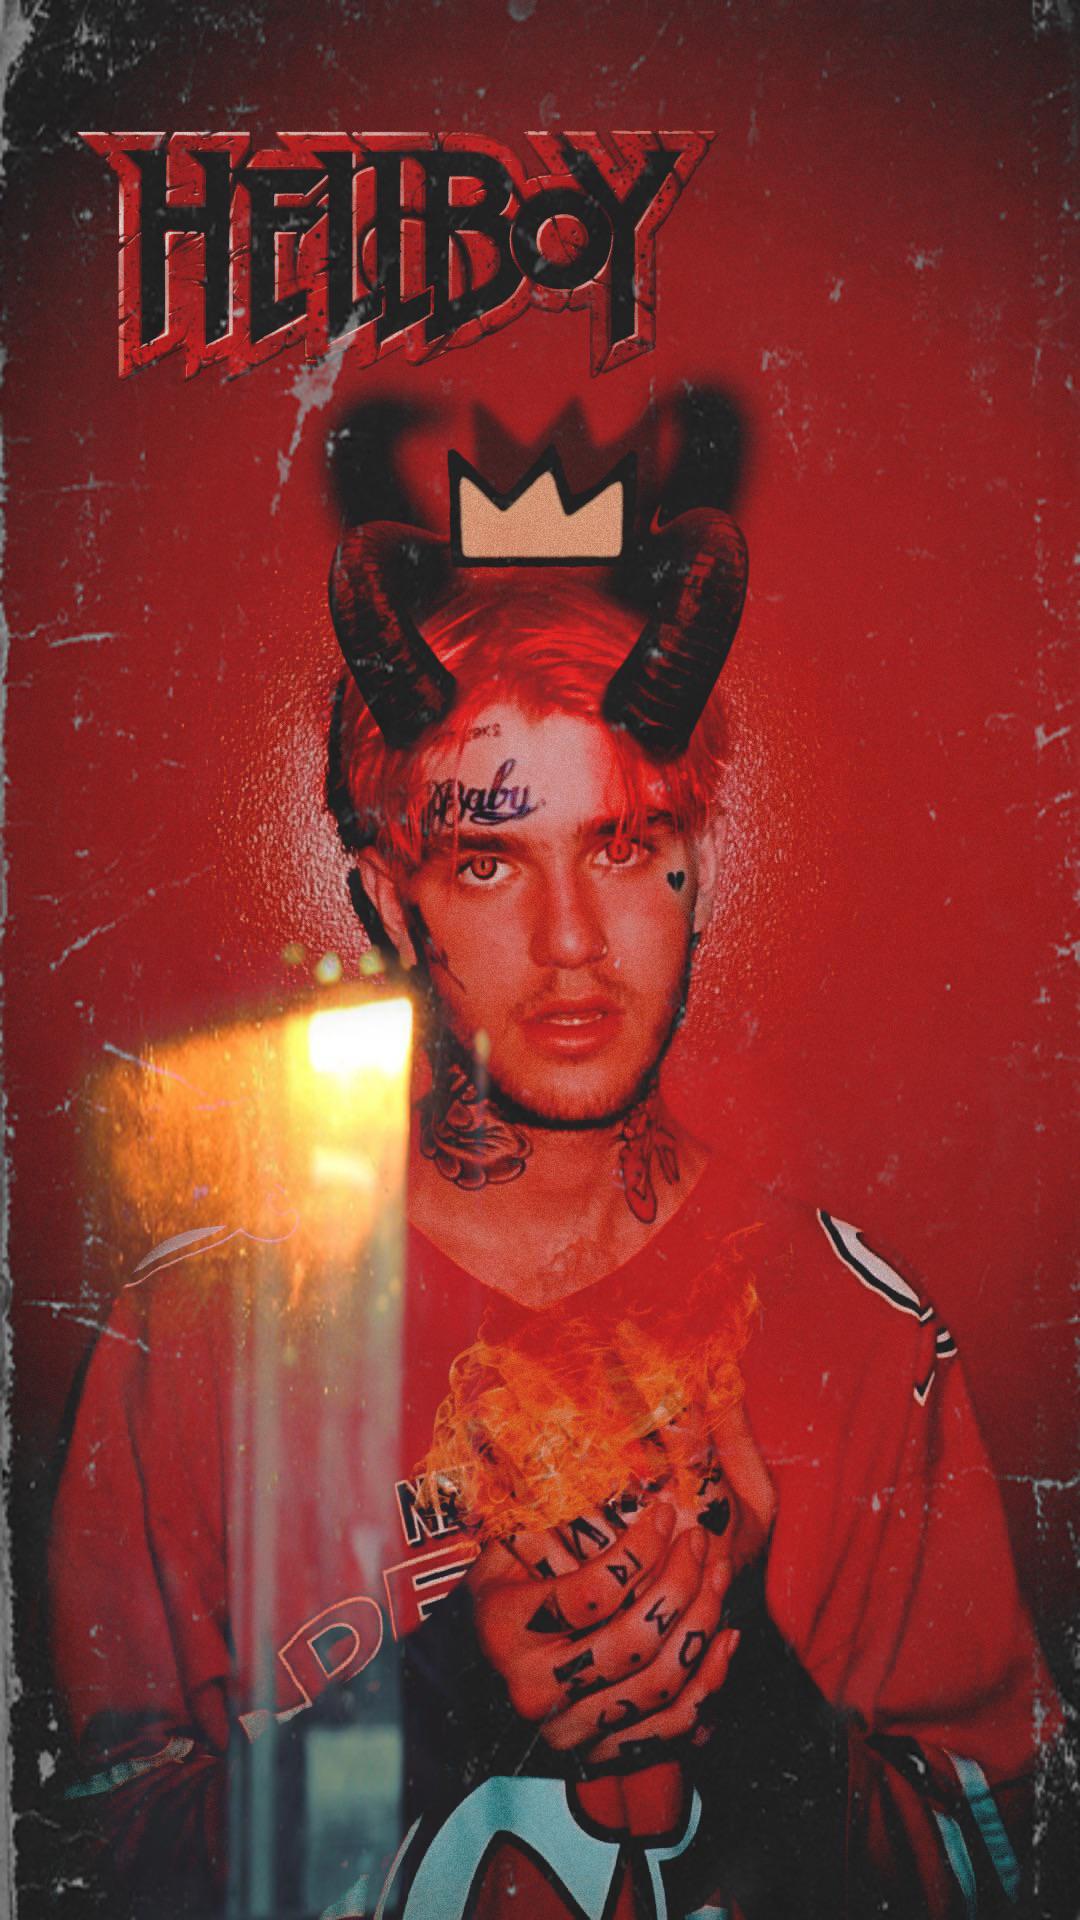 Lil Peep wallpaper I made for my phone - Lil Peep